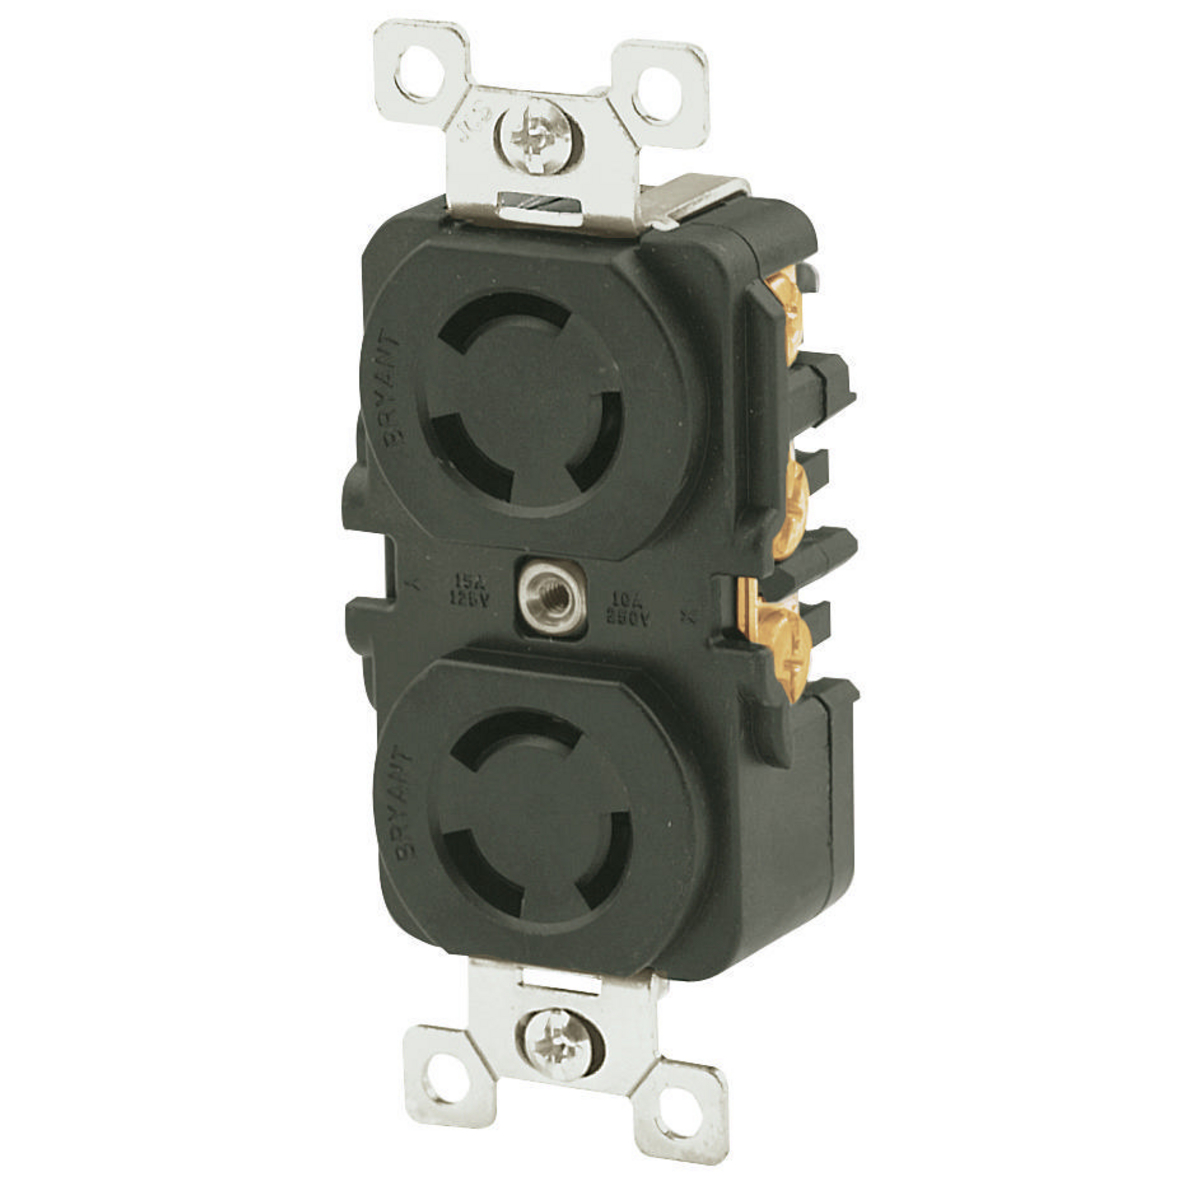 NEW IN FACTORY BAG * Details about   BRYANT 7580DR LOCKING DUPLEX RECEPTACLE 